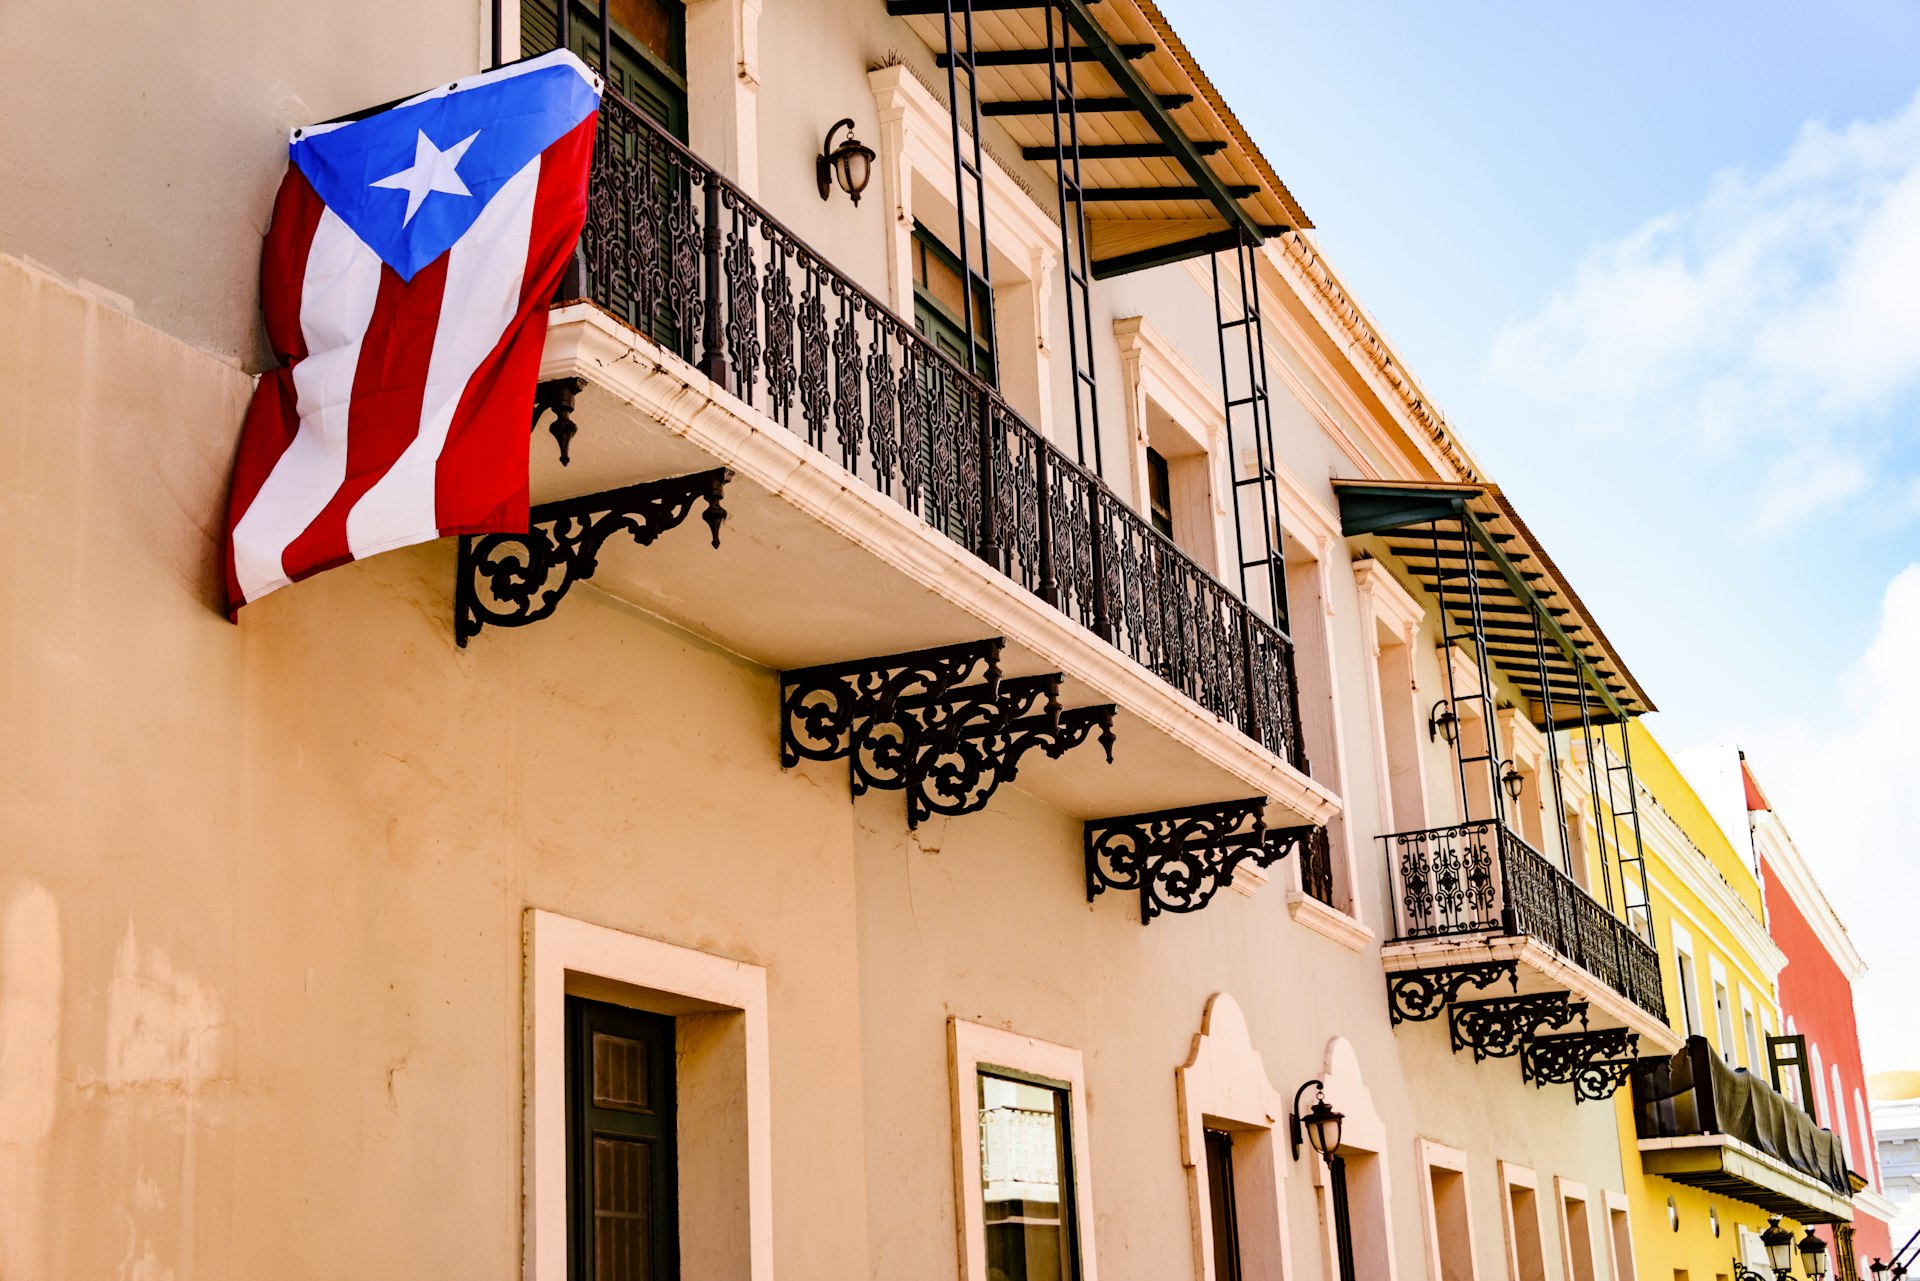 Colorful house facades along a street in Old San Juan, Puerto Rico, with a Puerto Rican flag hanging down from one of the balconies 